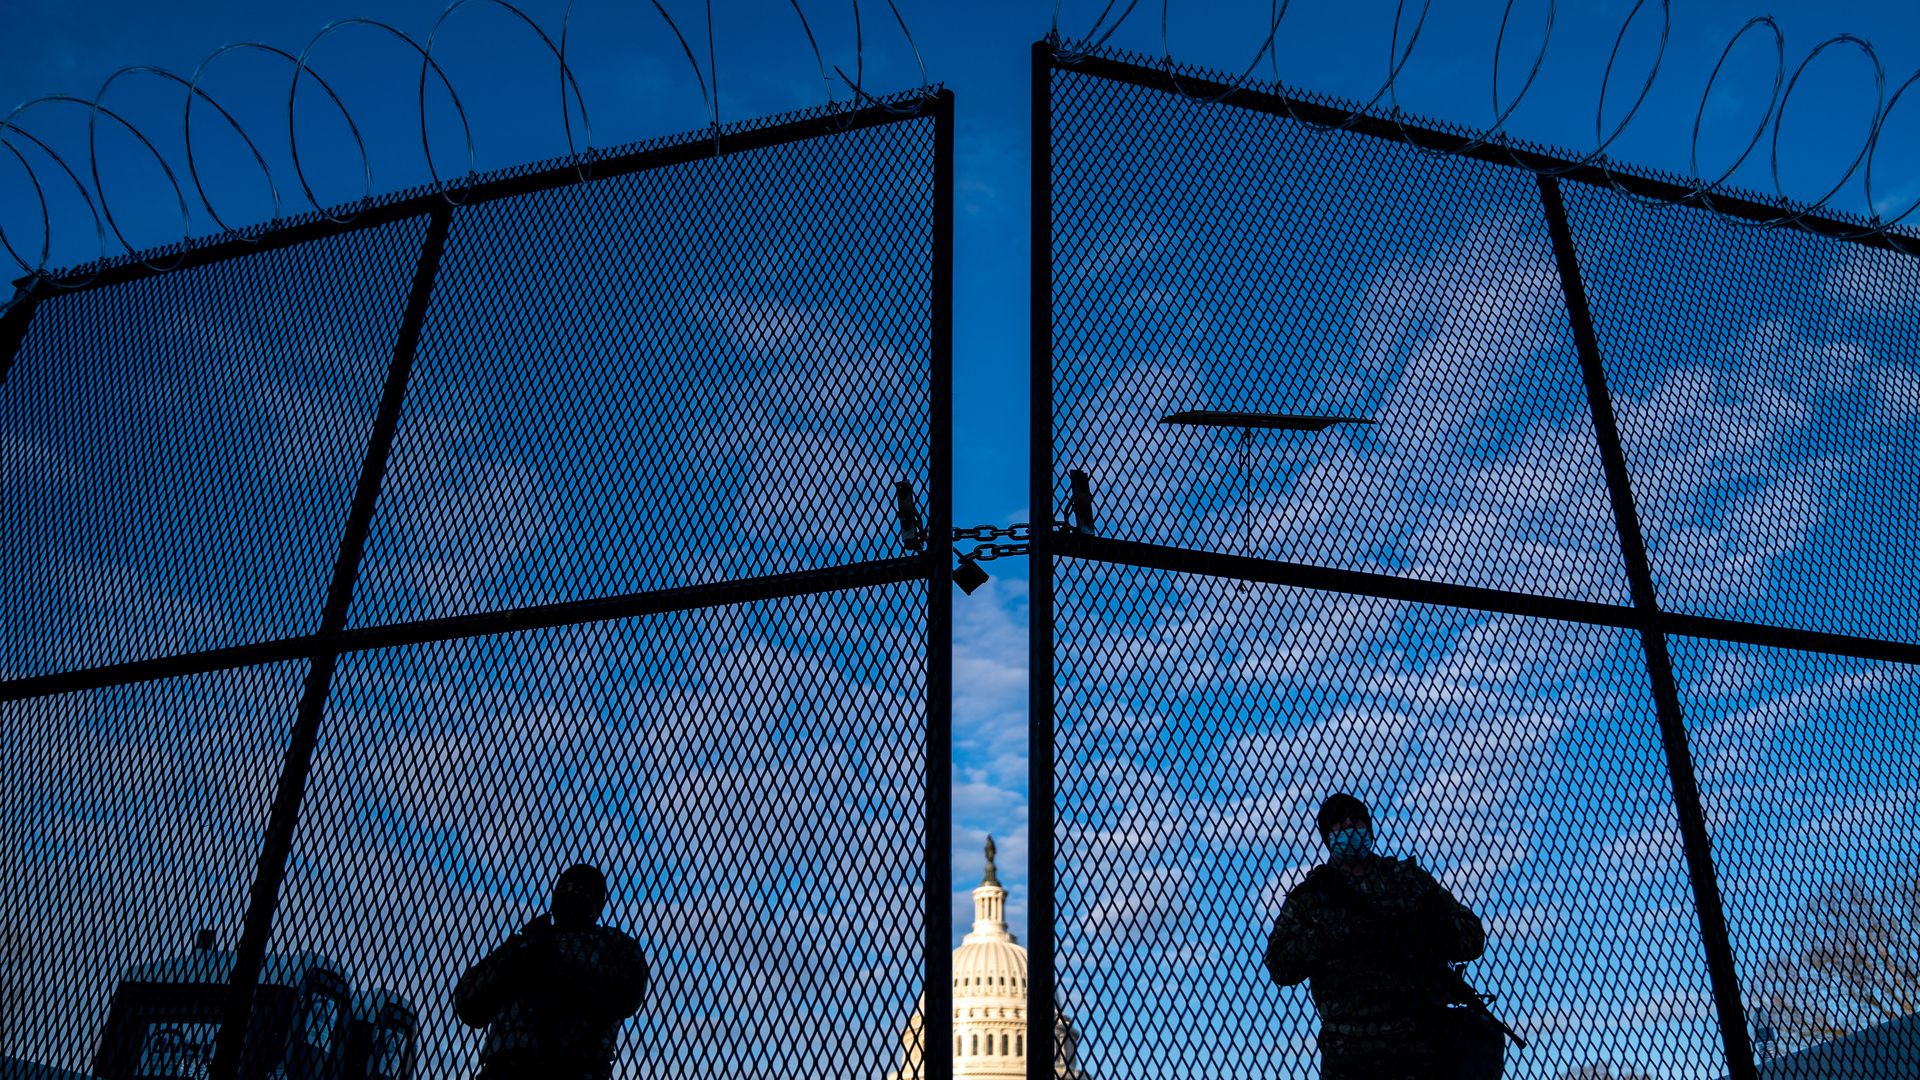 National Guardsmen are seen behind new high fencing as both protect the U.S. Capitol behind them.